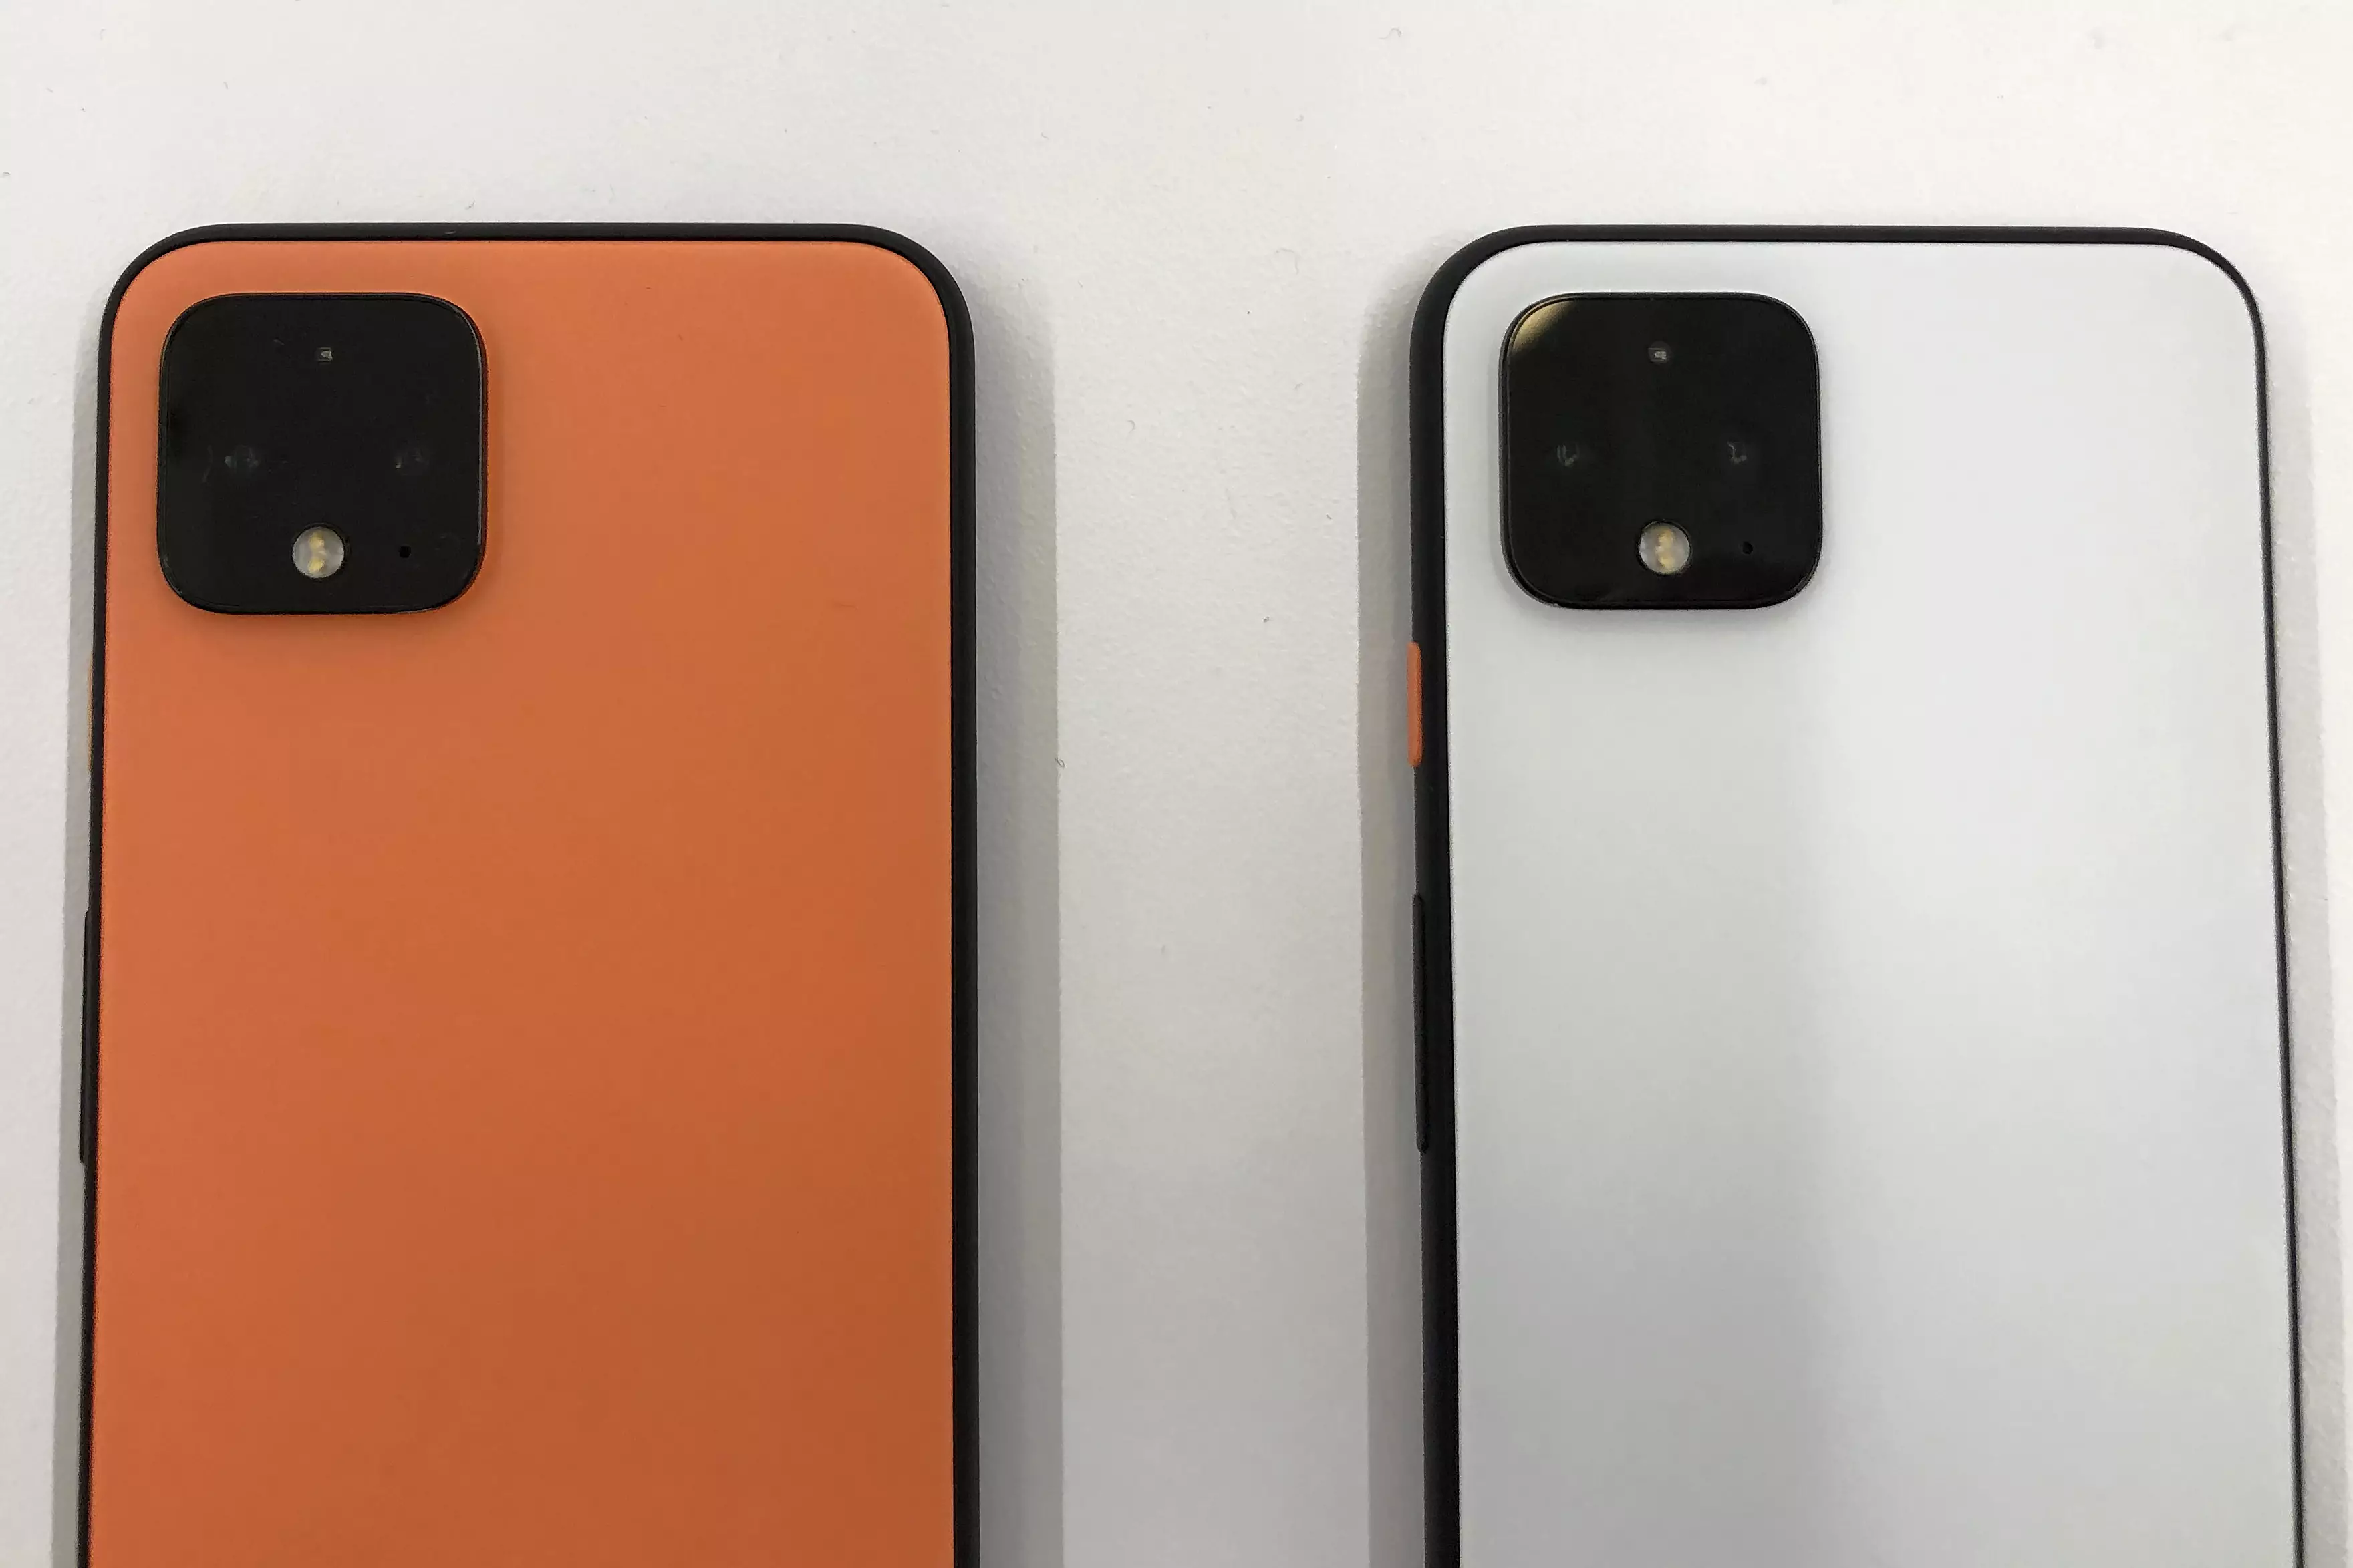 The phone comes in white, black and 'oh so orange'.